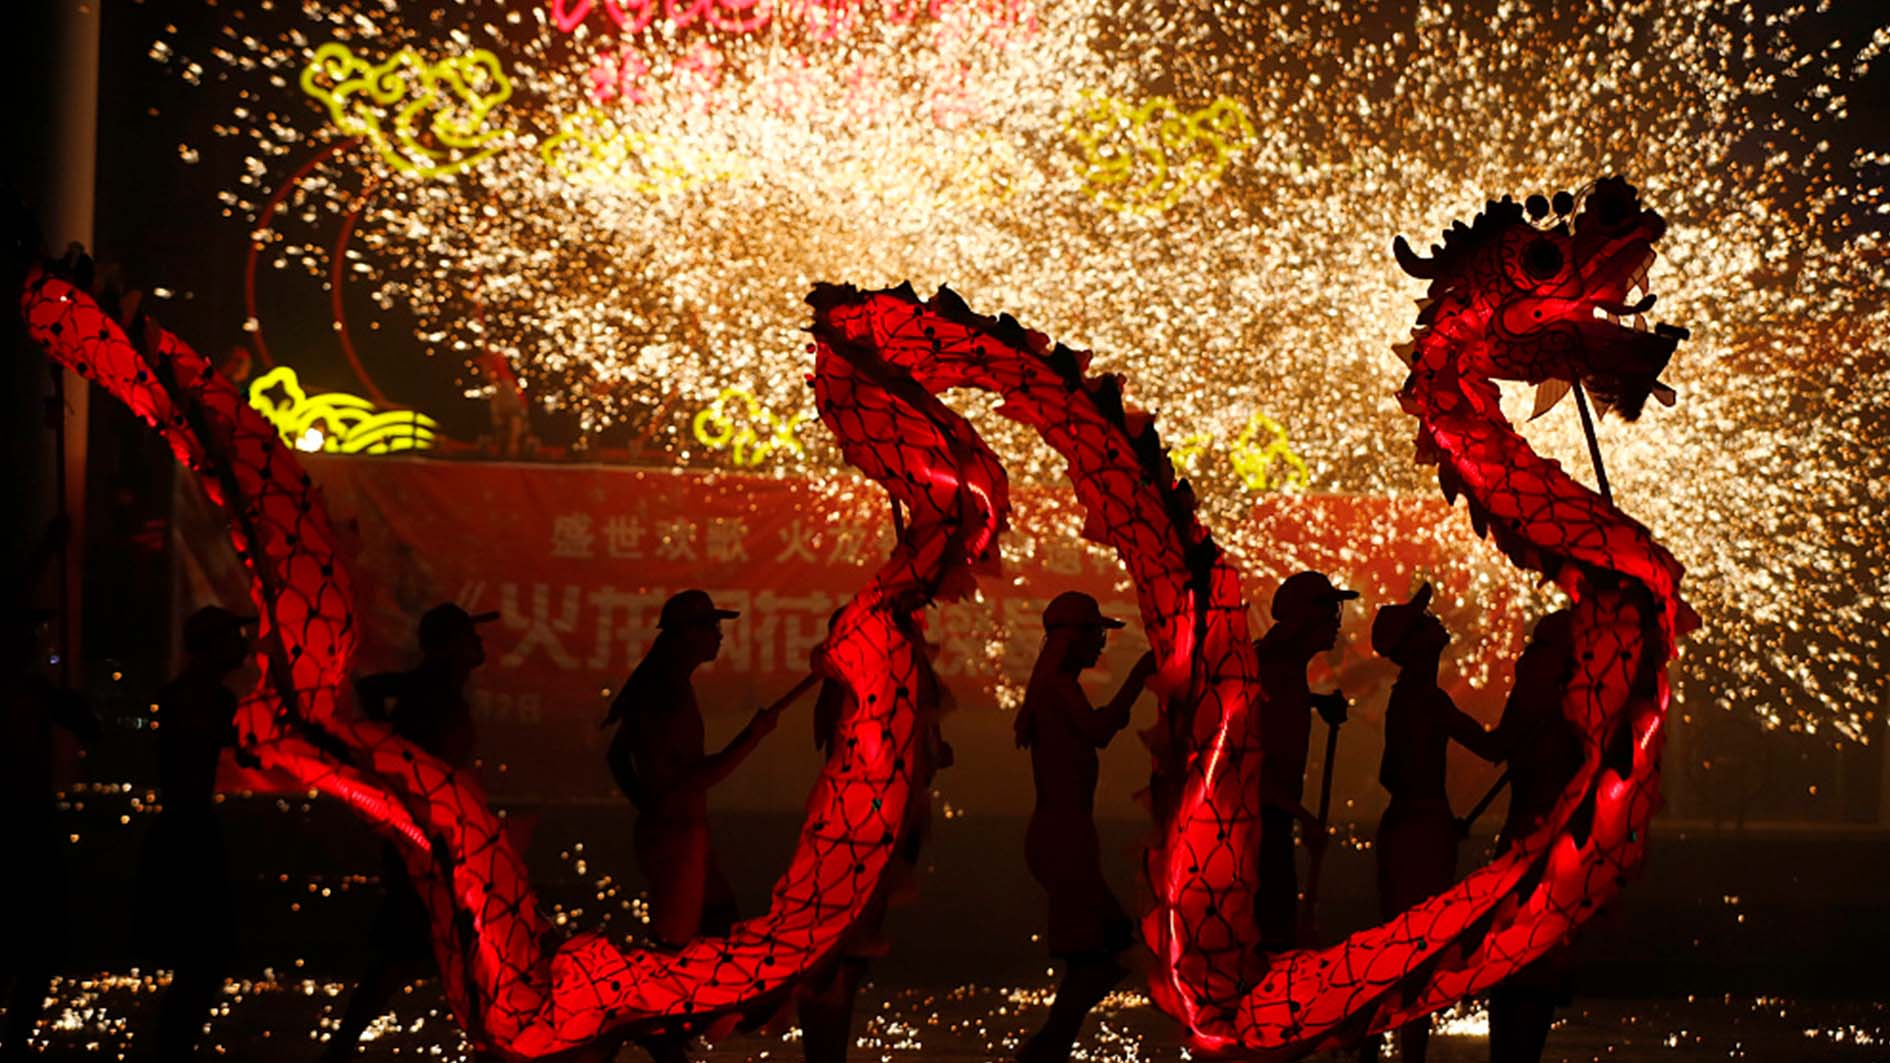 Folk artists performed a spectacular dragon dance in the midst of sparkling...